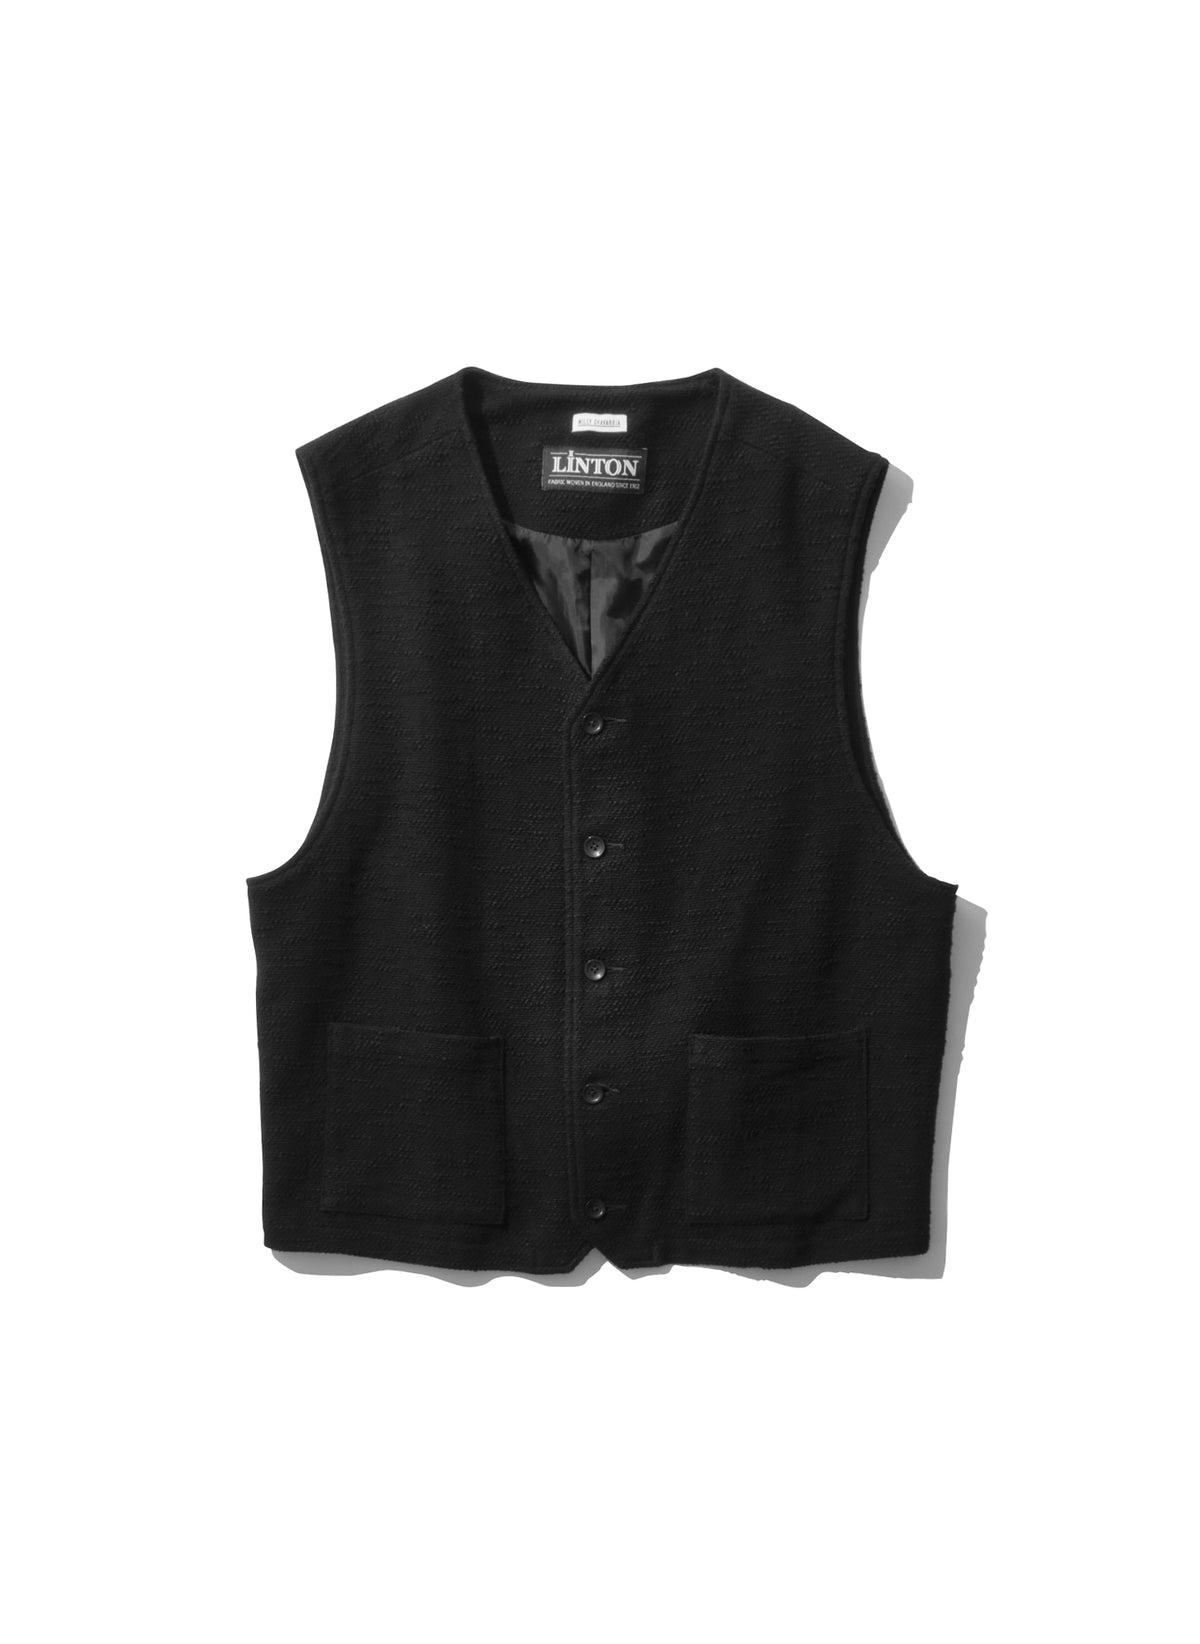 WILLY CHAVARRIA / TWEED VEST WILLY BLACK